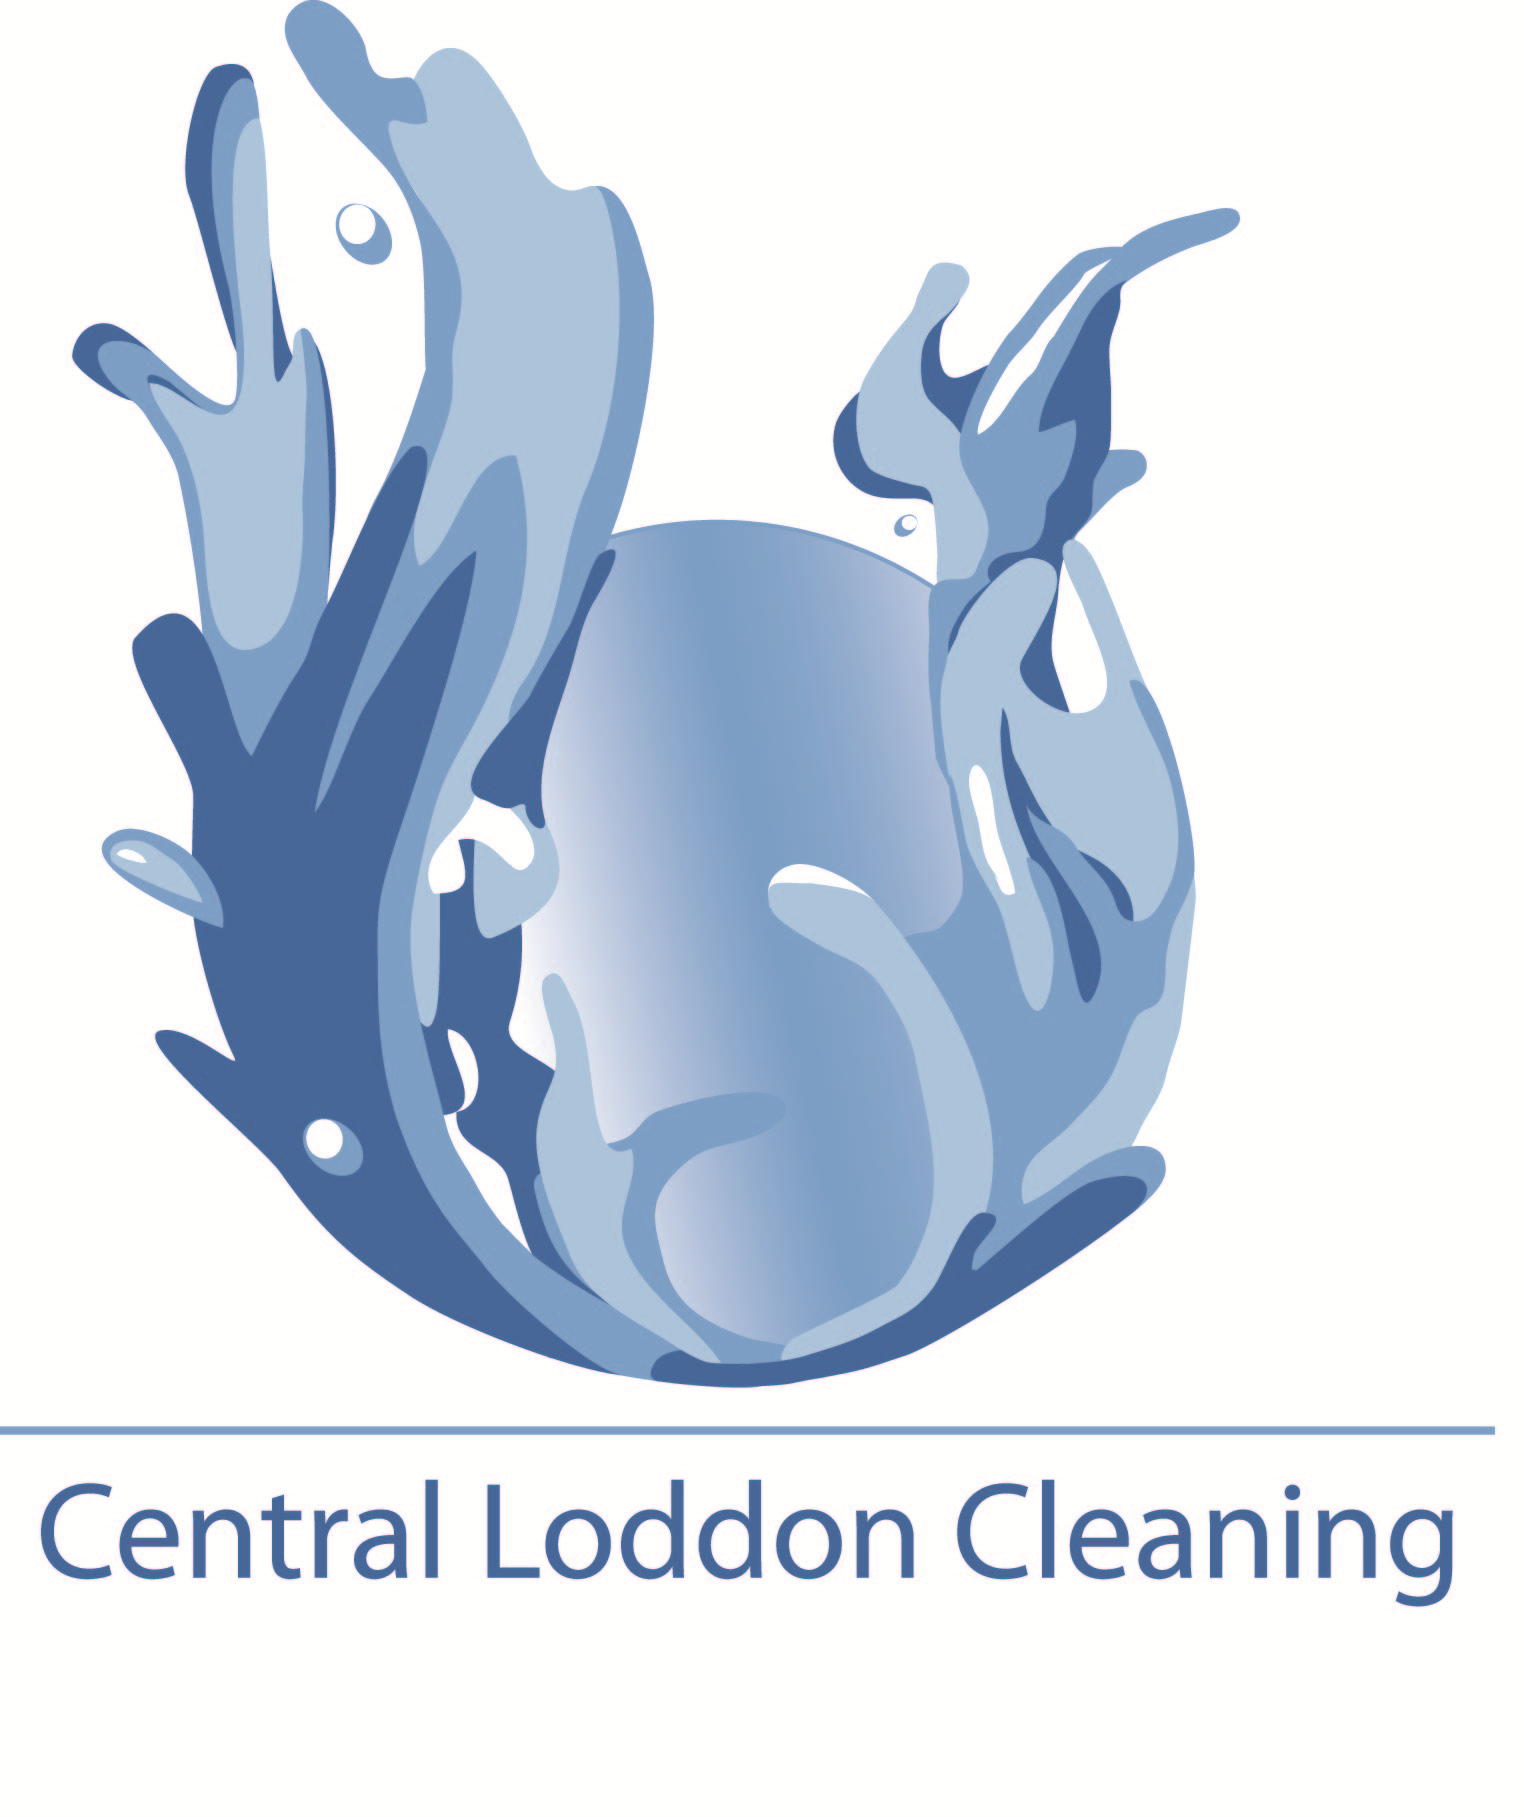 Central Loddon Cleaning